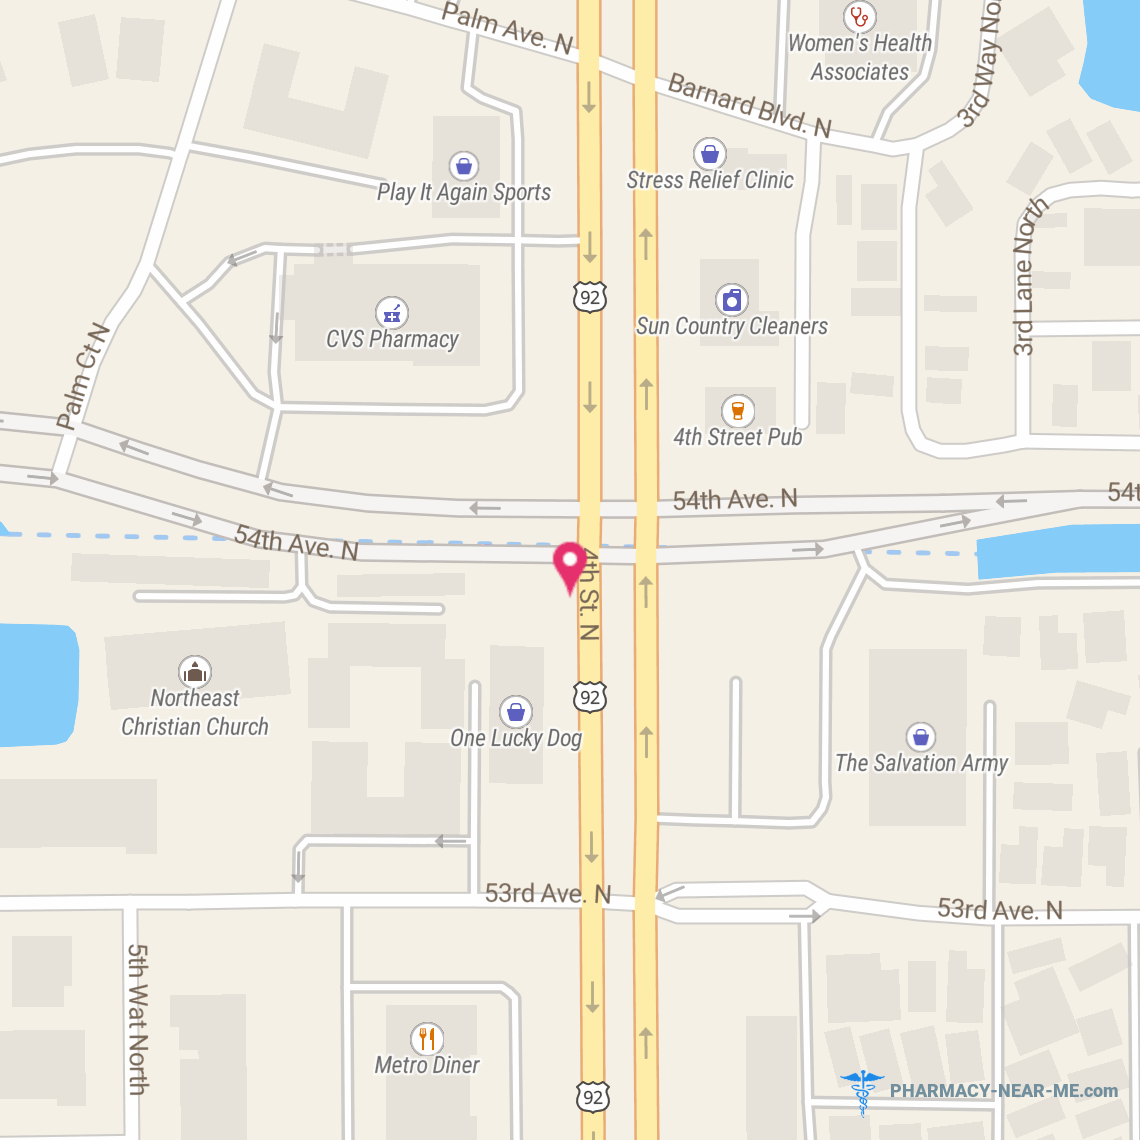 CVS PHARMACY #03466 - Pharmacy Hours, Phone, Reviews & Information: 5400 4th Street North, St. Petersburg, Florida 33703, United States